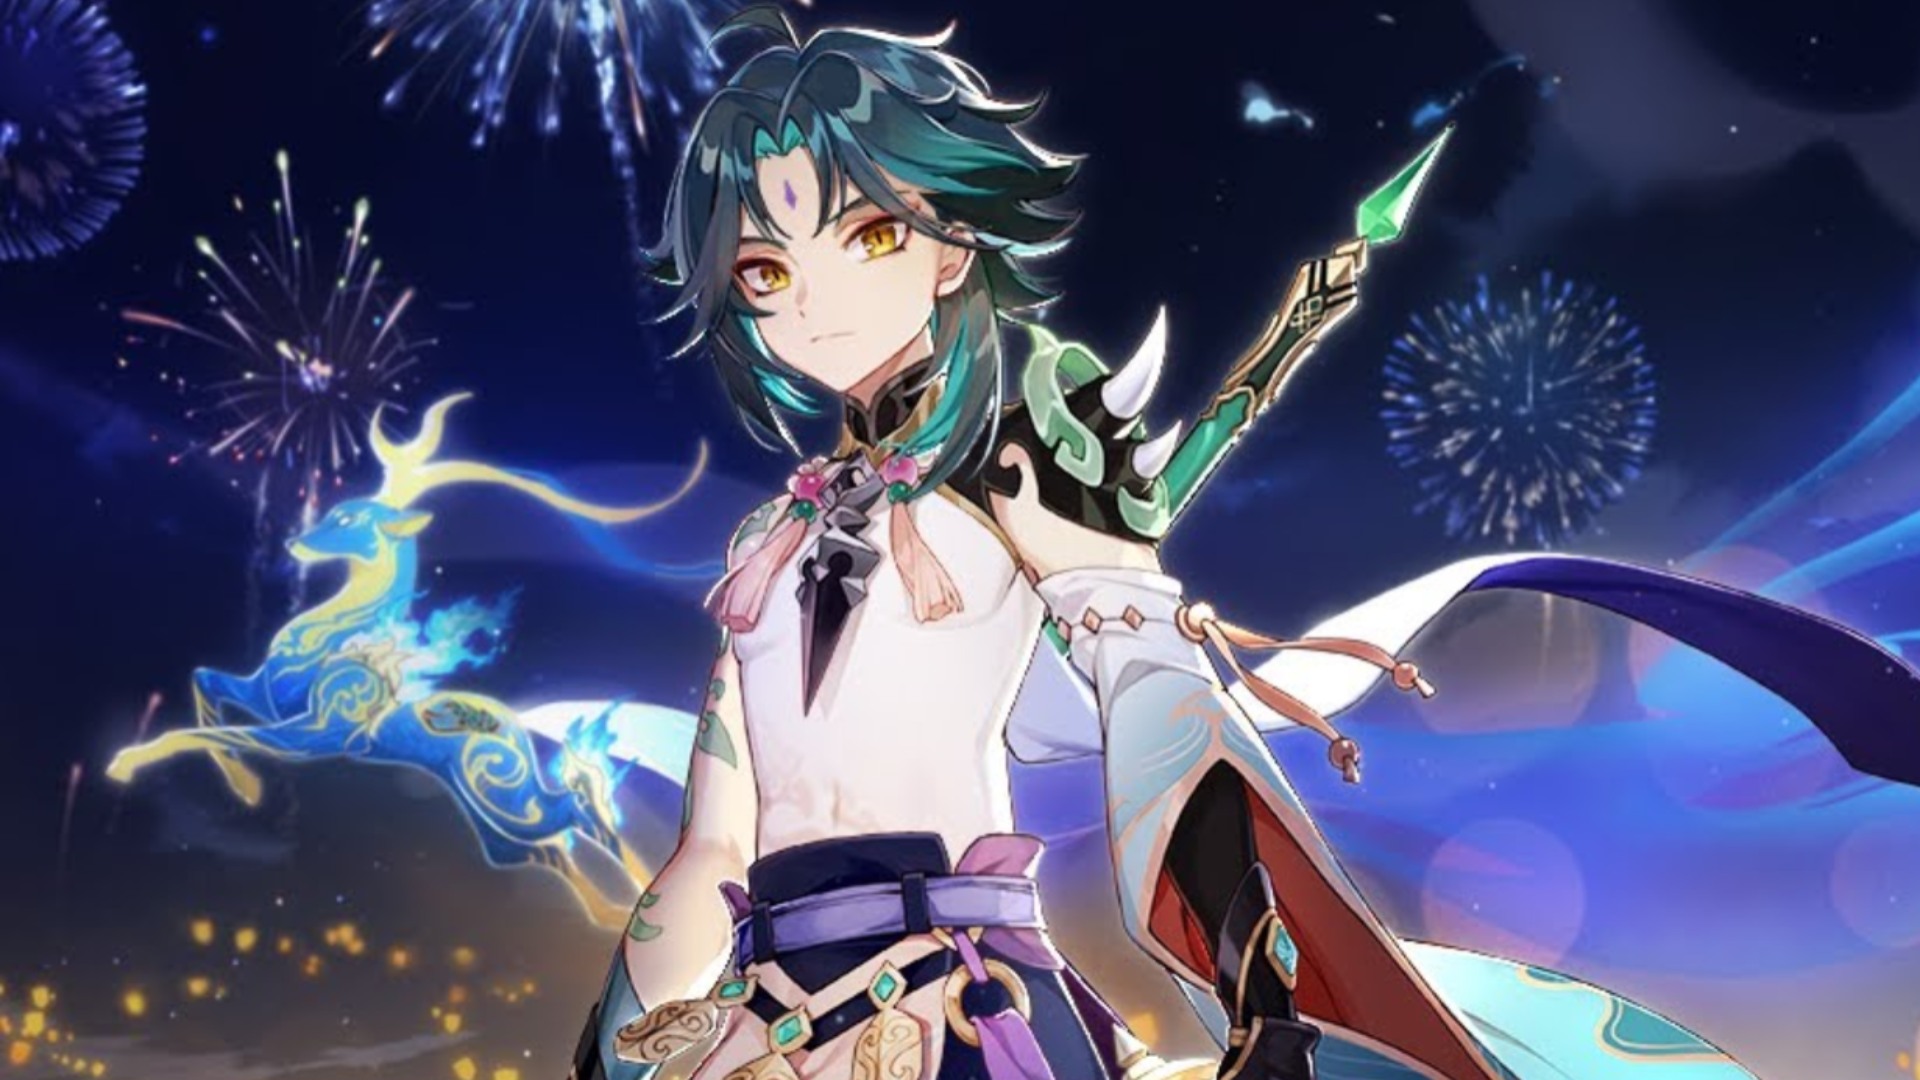 Genshin Impact's Xiao smiling beneath a sky full of fireworks